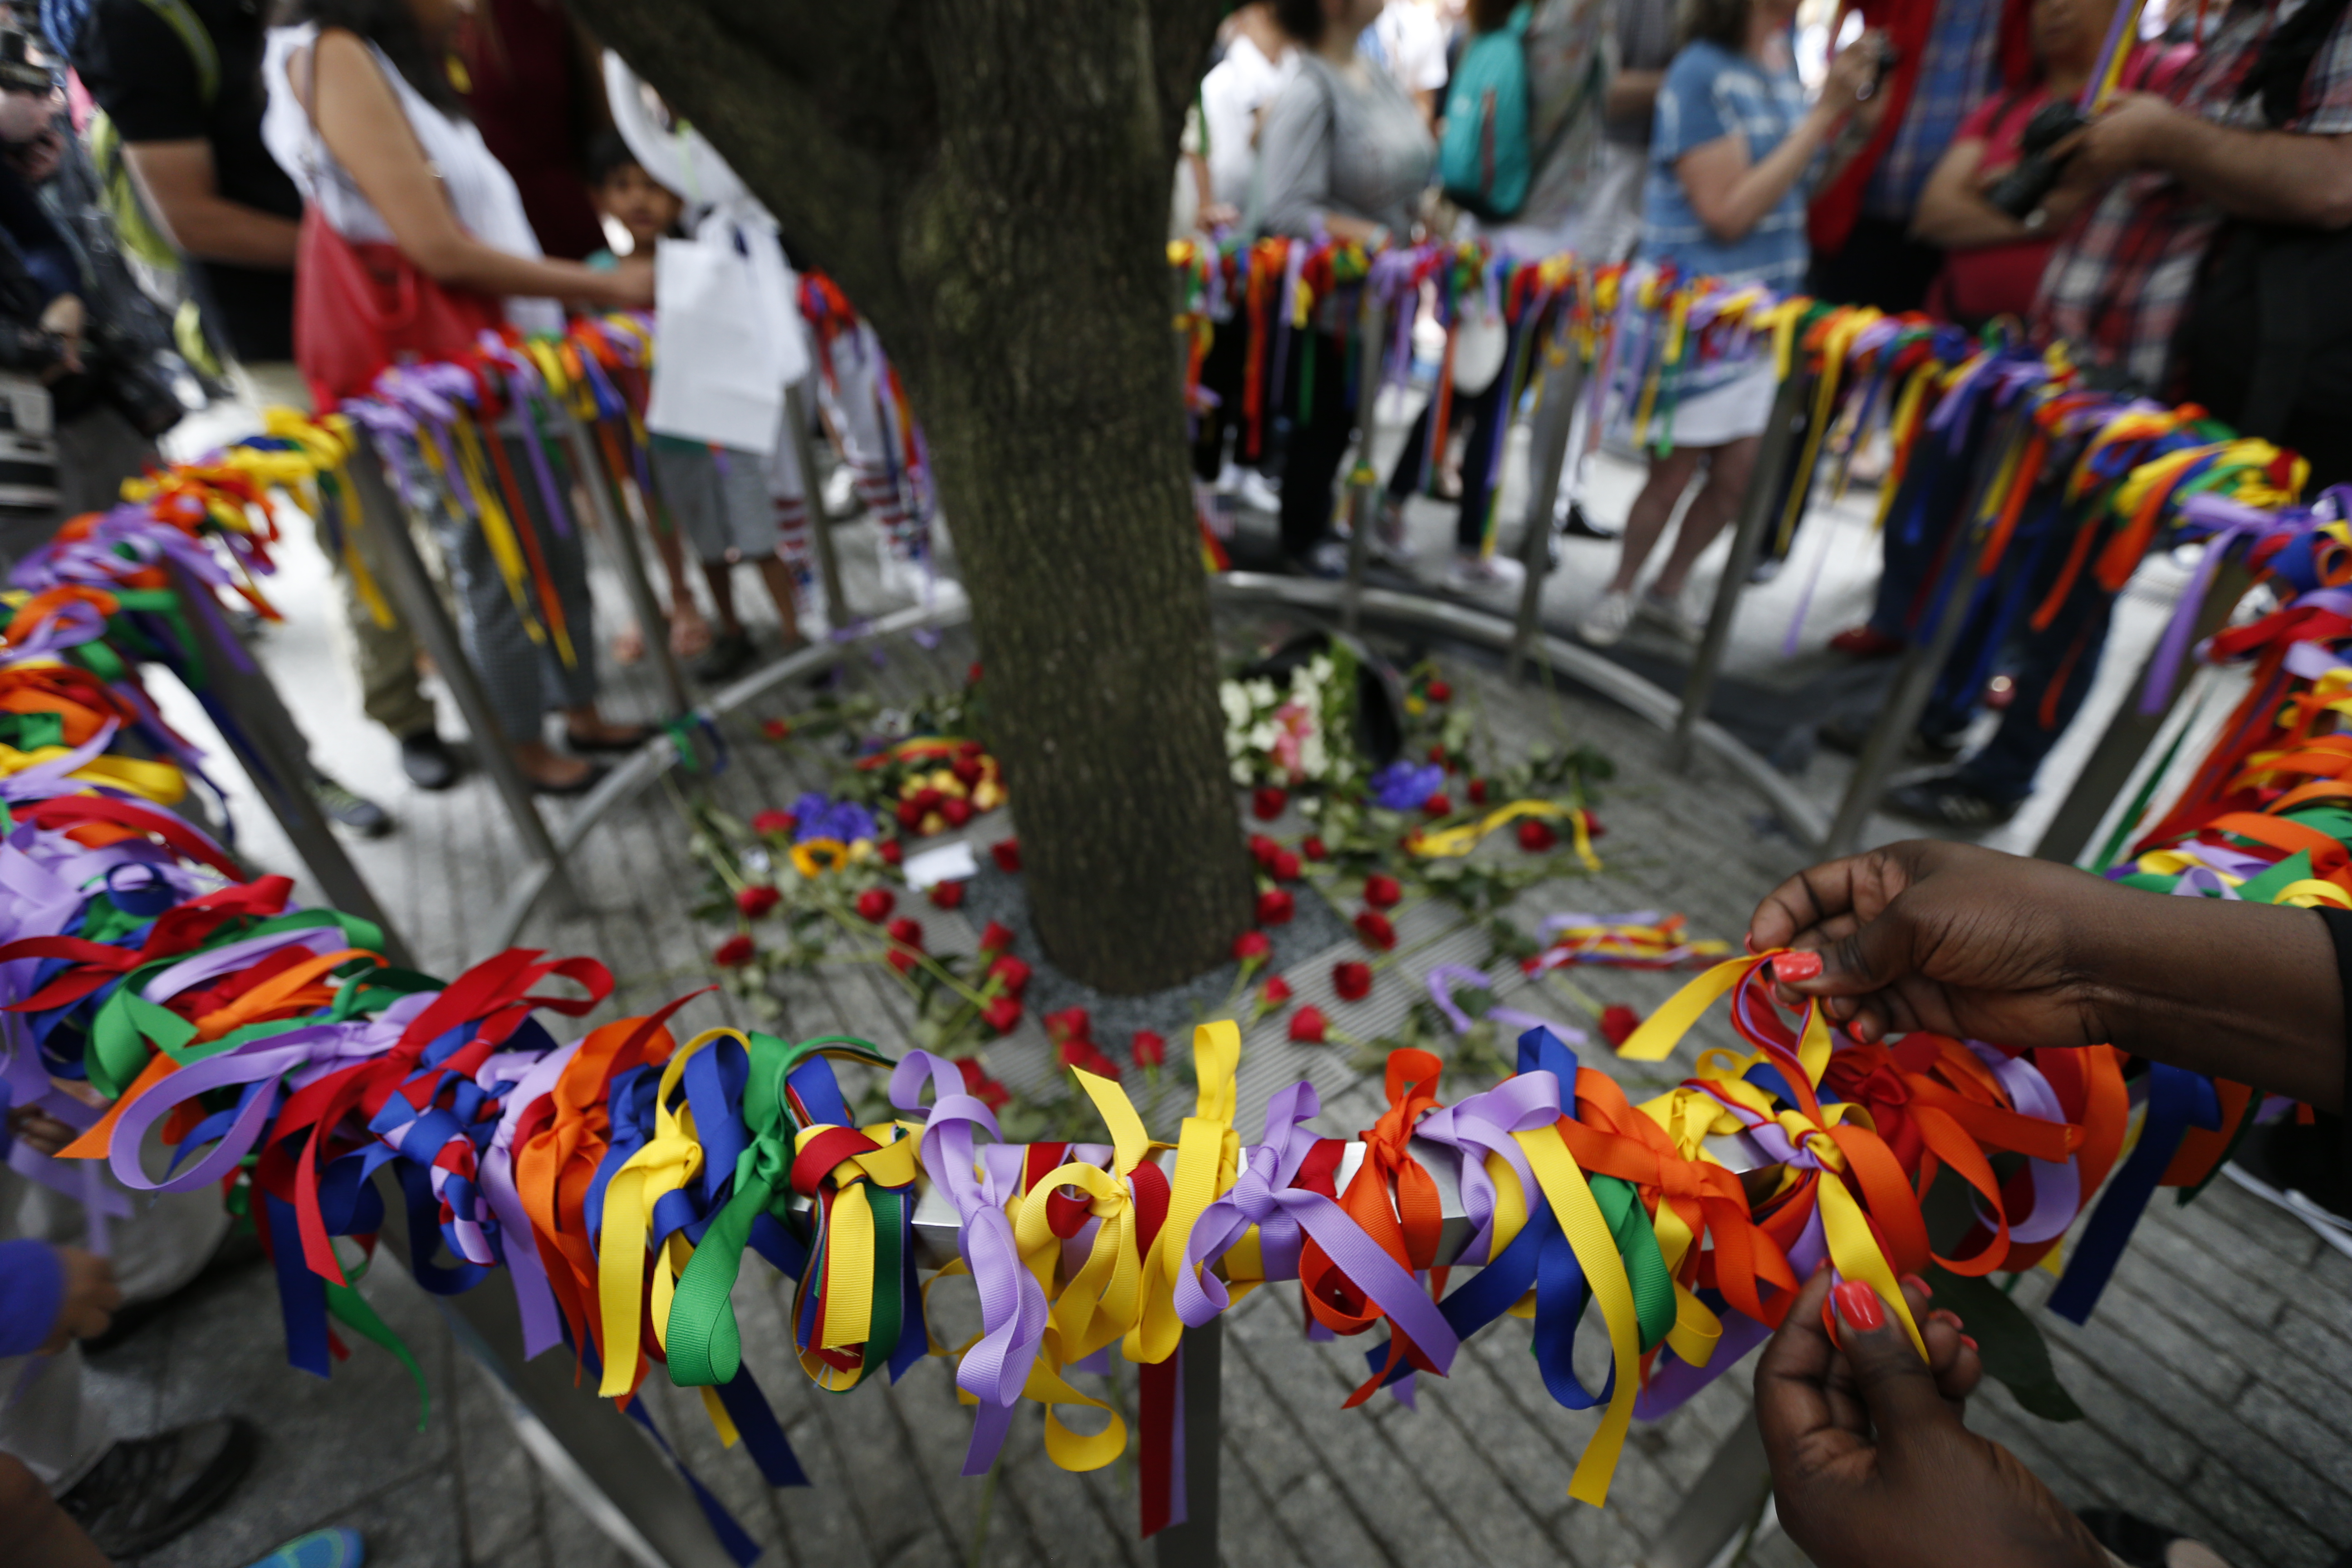 People tie multicolored ribbons on a railing surrounding the Survivor Tree to honor victims of the Orlando nightclub attack.